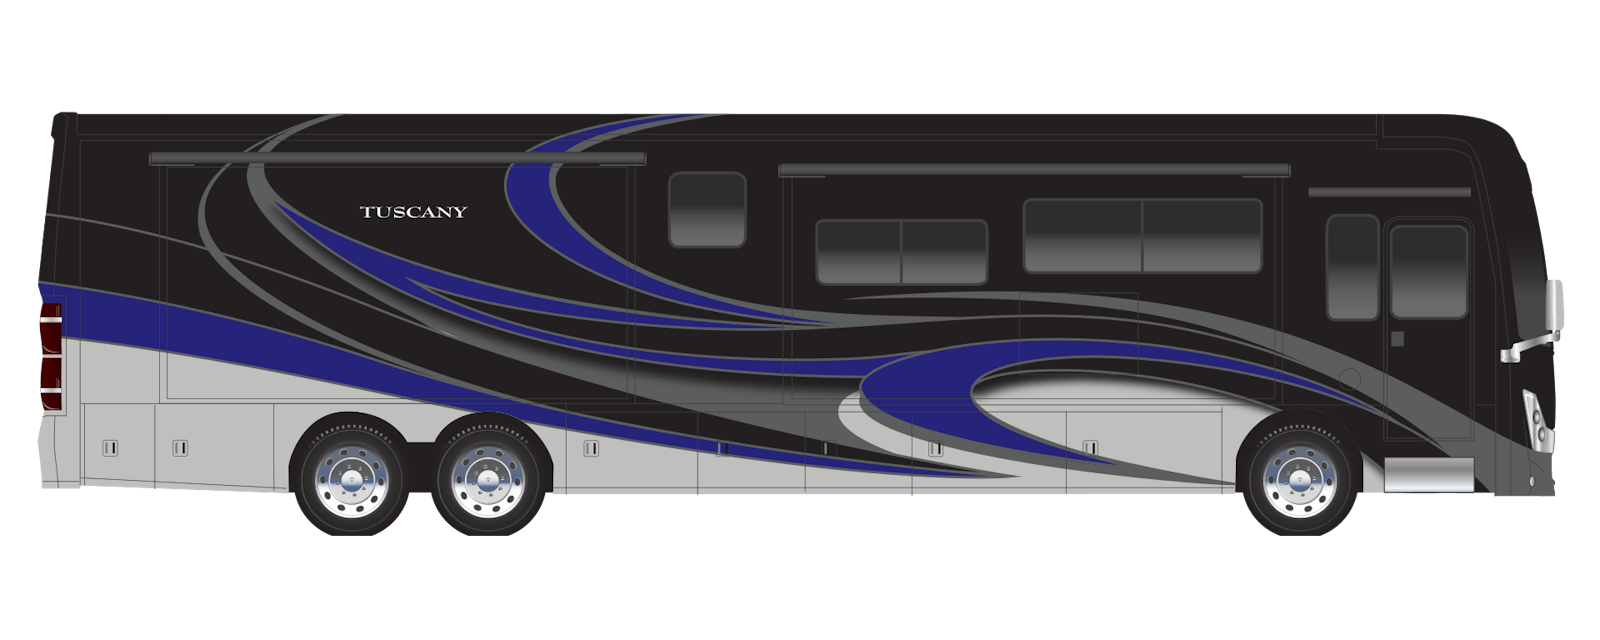 2022 Thor Tuscany Class A Diesel Pusher RV Triton Full Body Paint Exterior Artwork